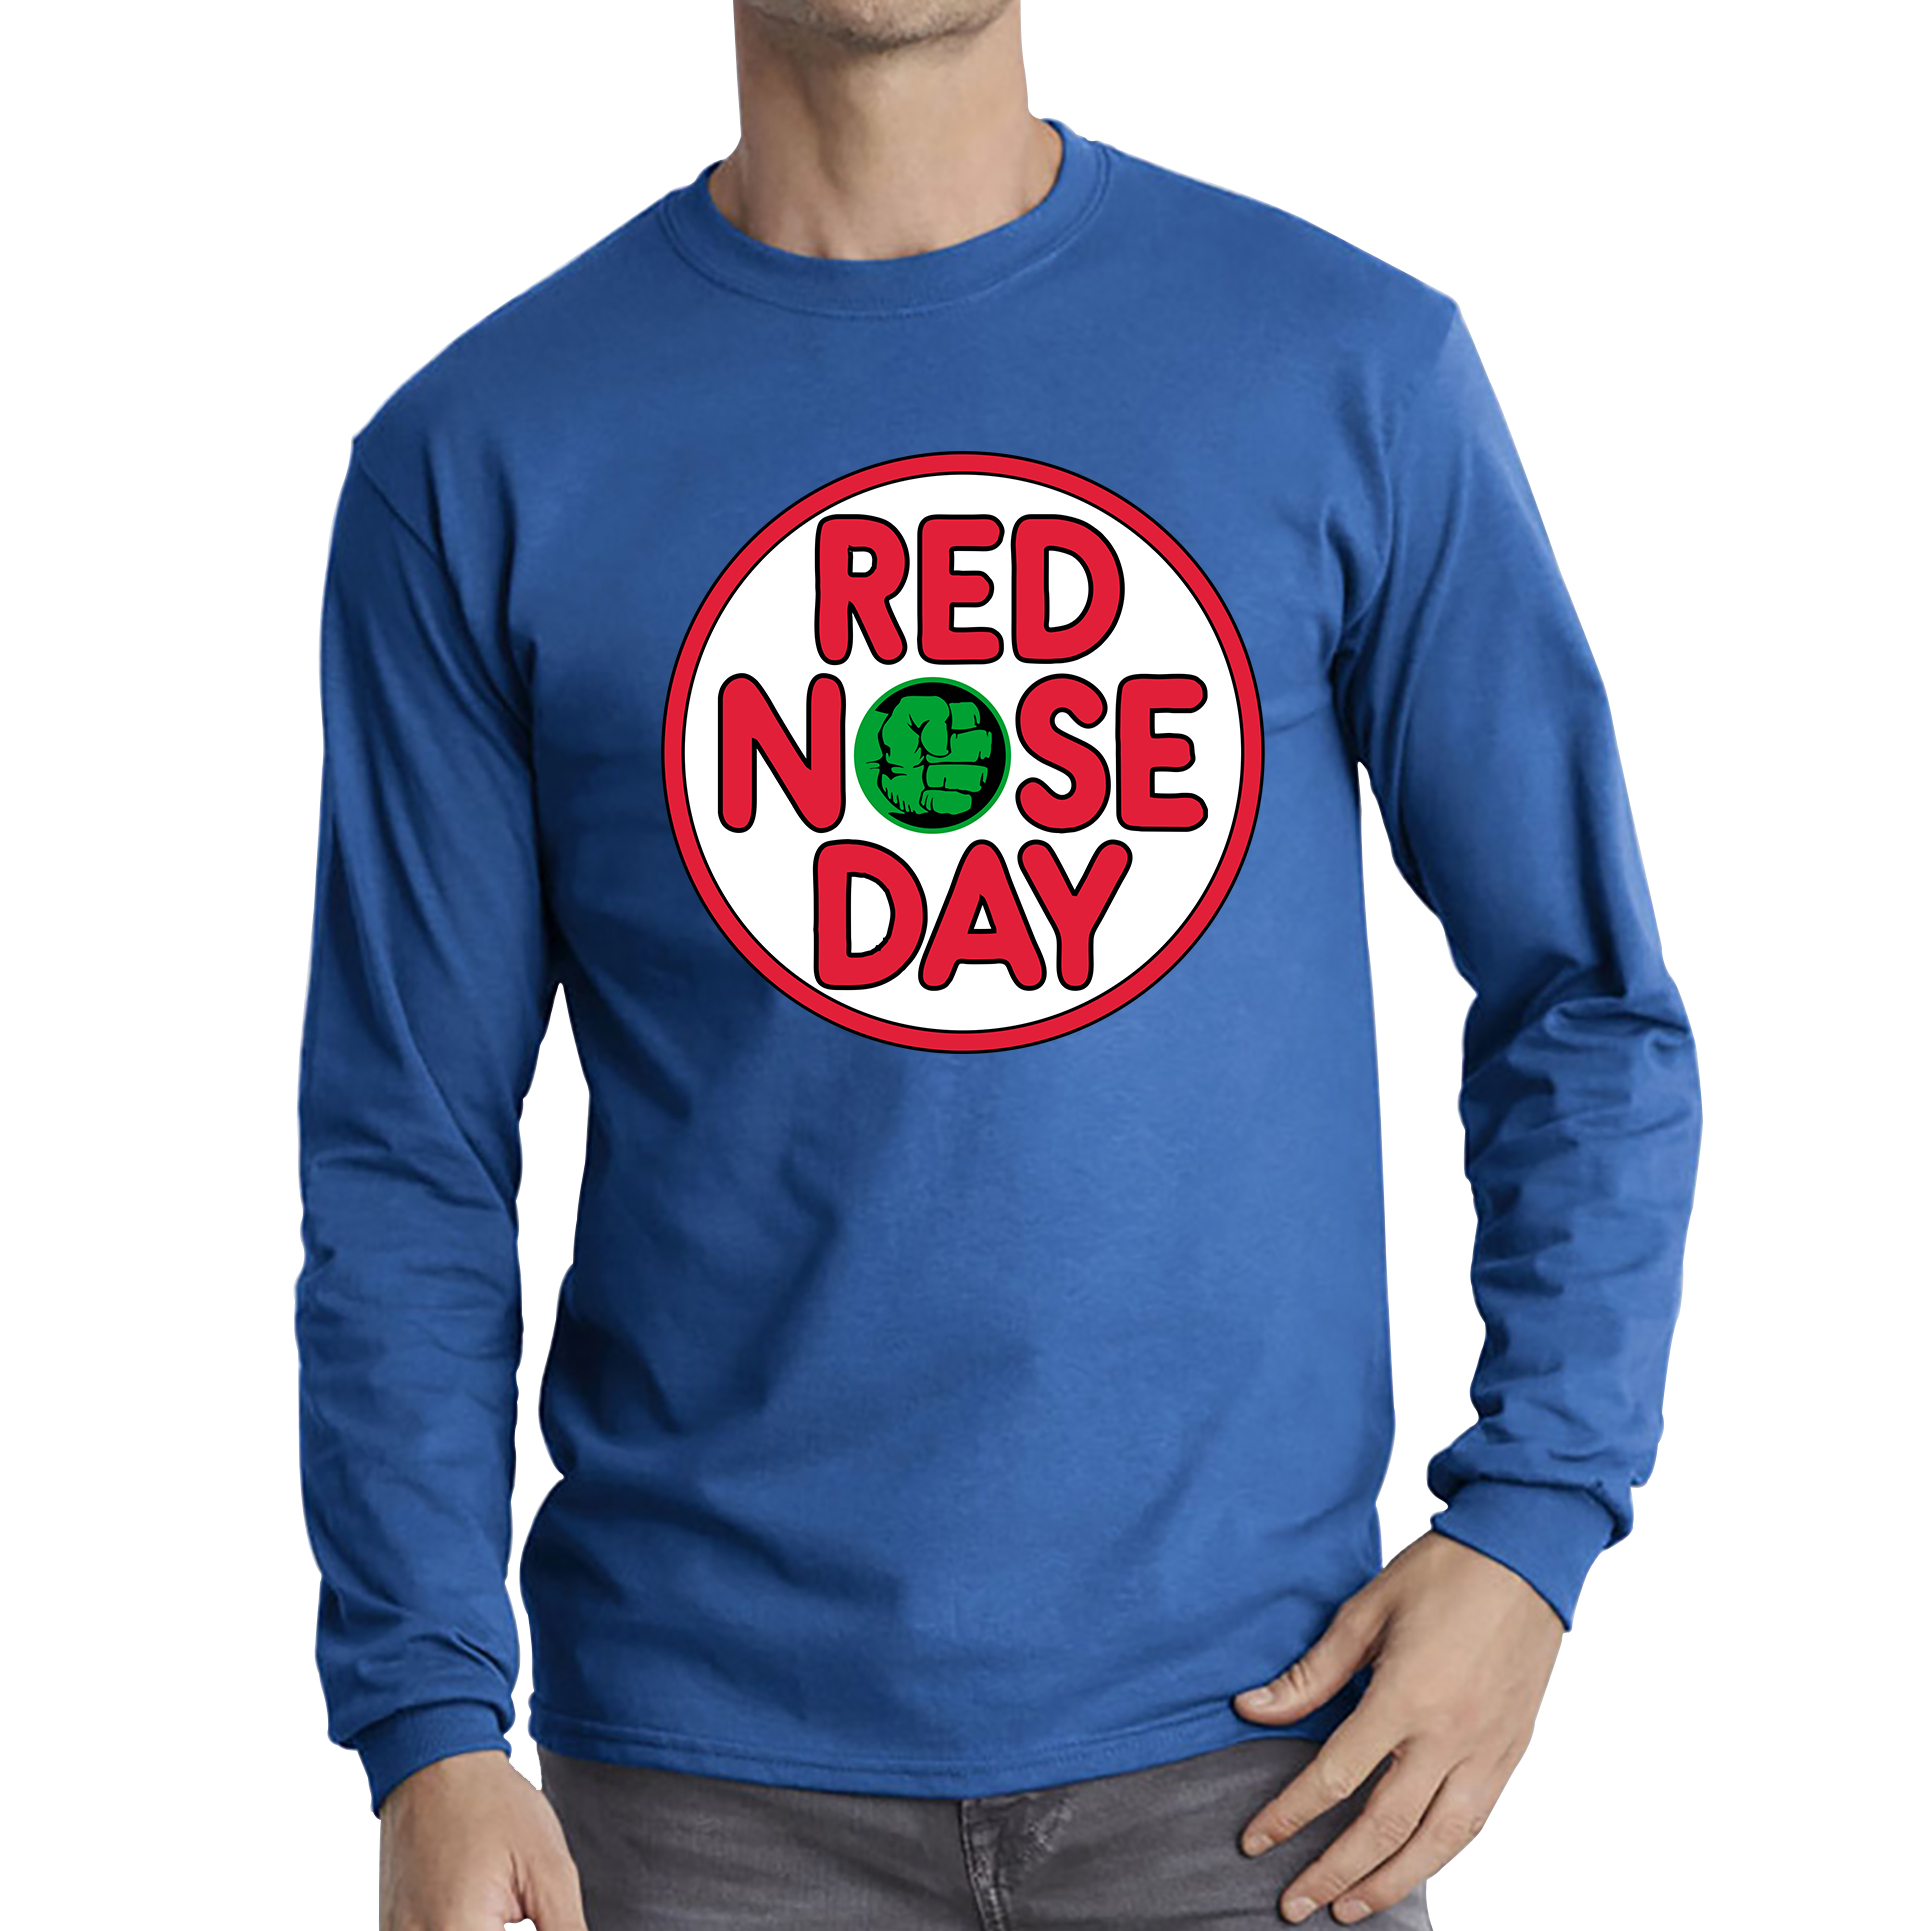 Marvel Avengers Hulk Hand Red Nose Day Adult Long Sleeve T Shirt. 50% Goes To Charity